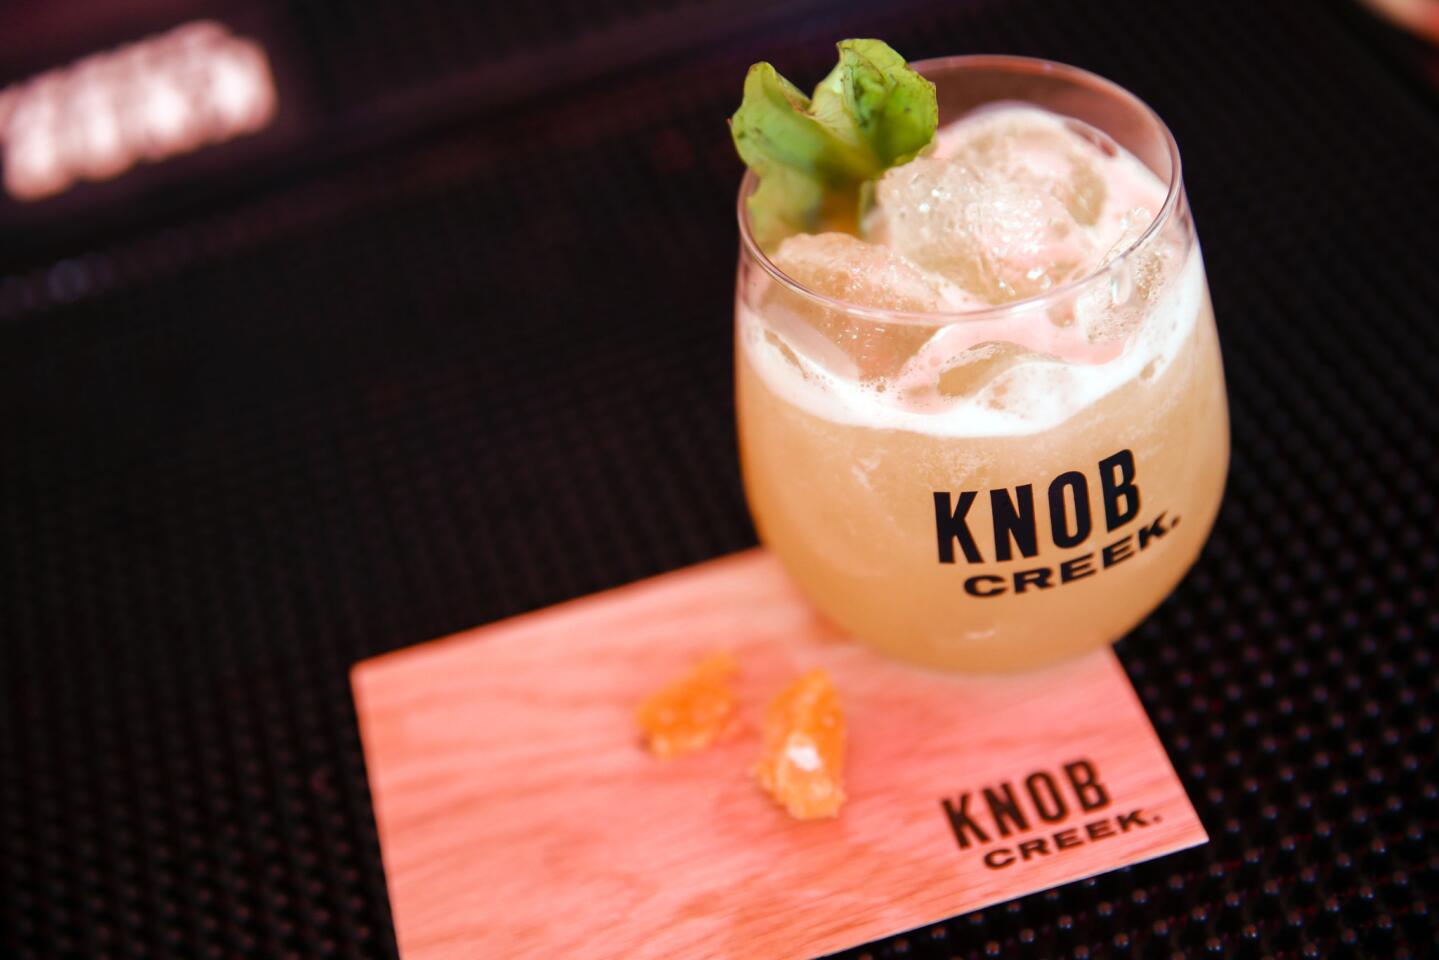 Knob Creek "Out In The Orchard" cocktail